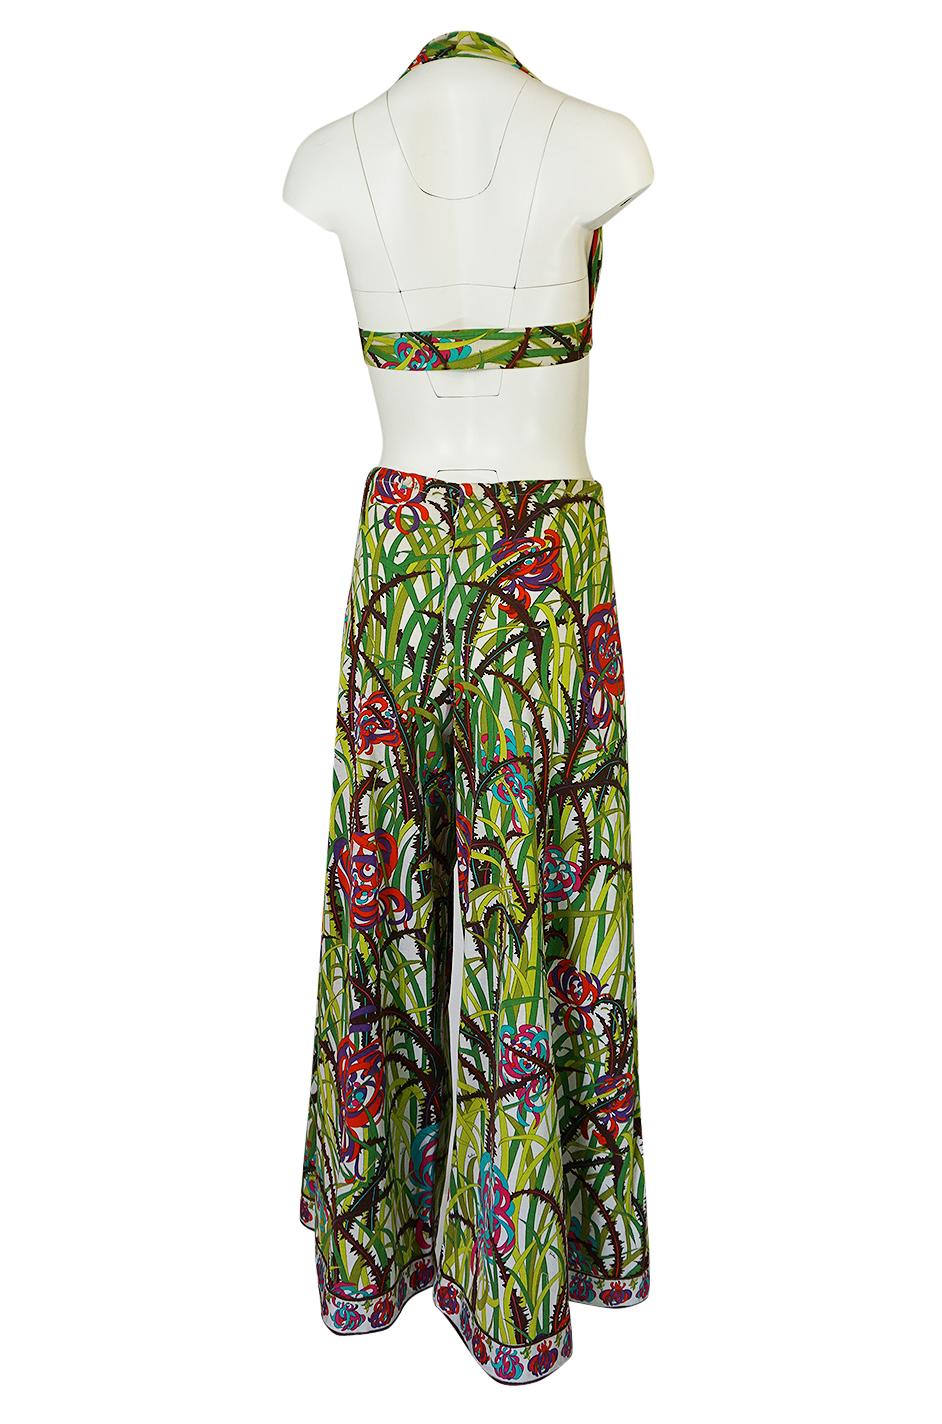 This is an absolutely gorgeous, early 1960s printed Emilio Pucci two piece set with a tie front halter top and a pair of incredible, wide leg matching pants. It is made of light, cotton jersey that has just a touch of nylon woven into it. This gives